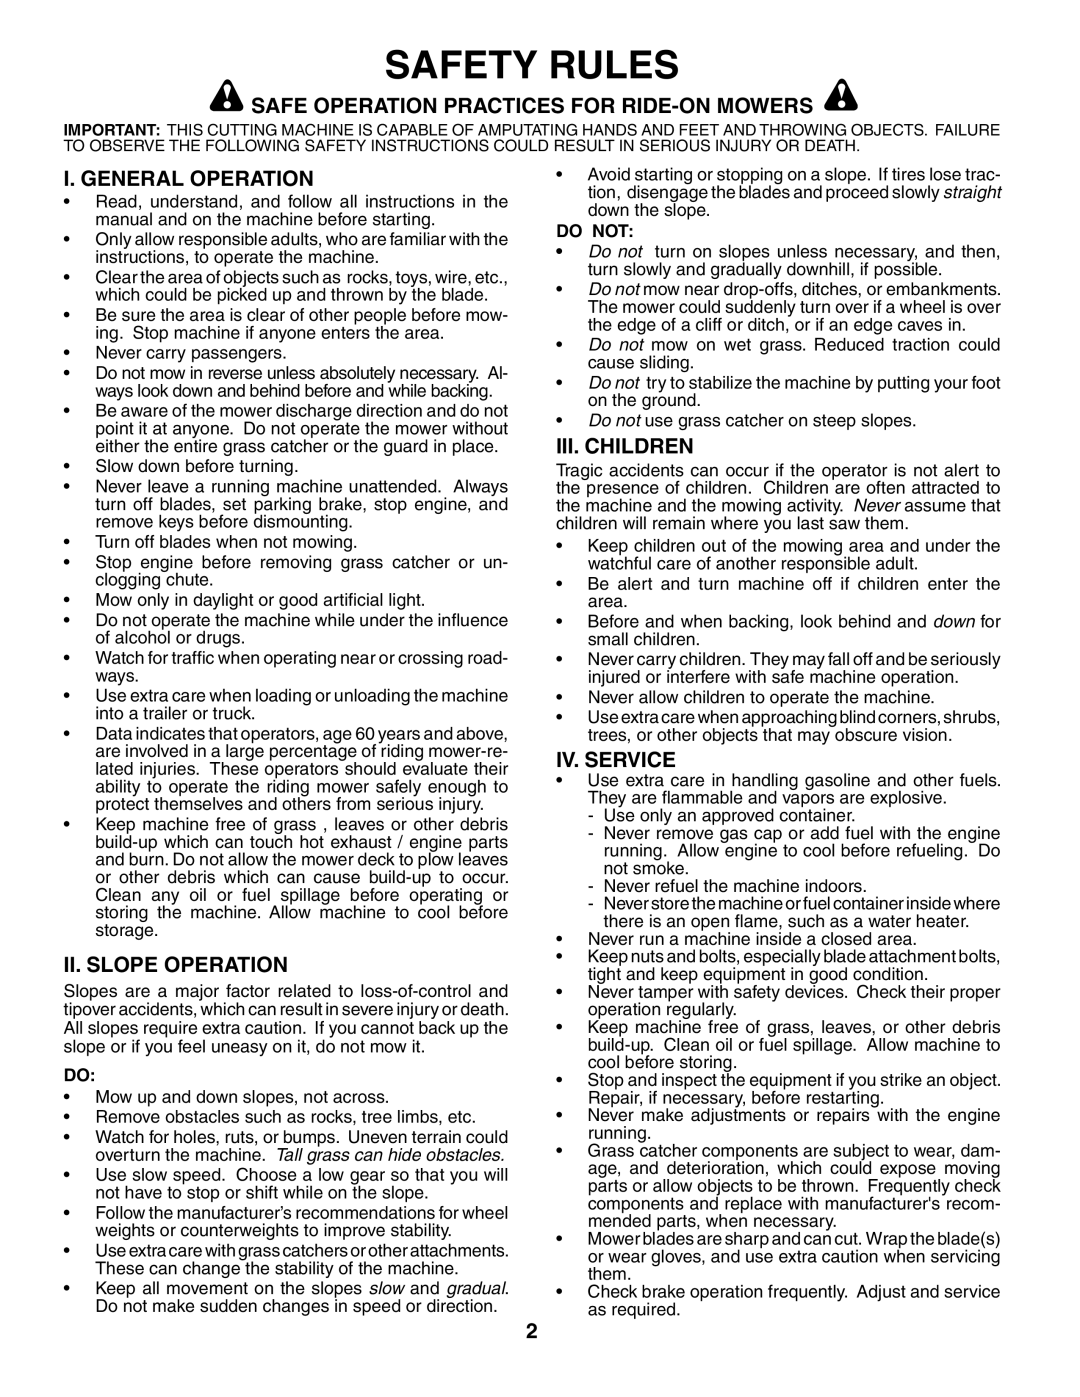 Weed Eater 191064 Safety Rules, Safe Operation Practices For Ride-On Mowers, I. General Operation, Ii. Slope Operation 